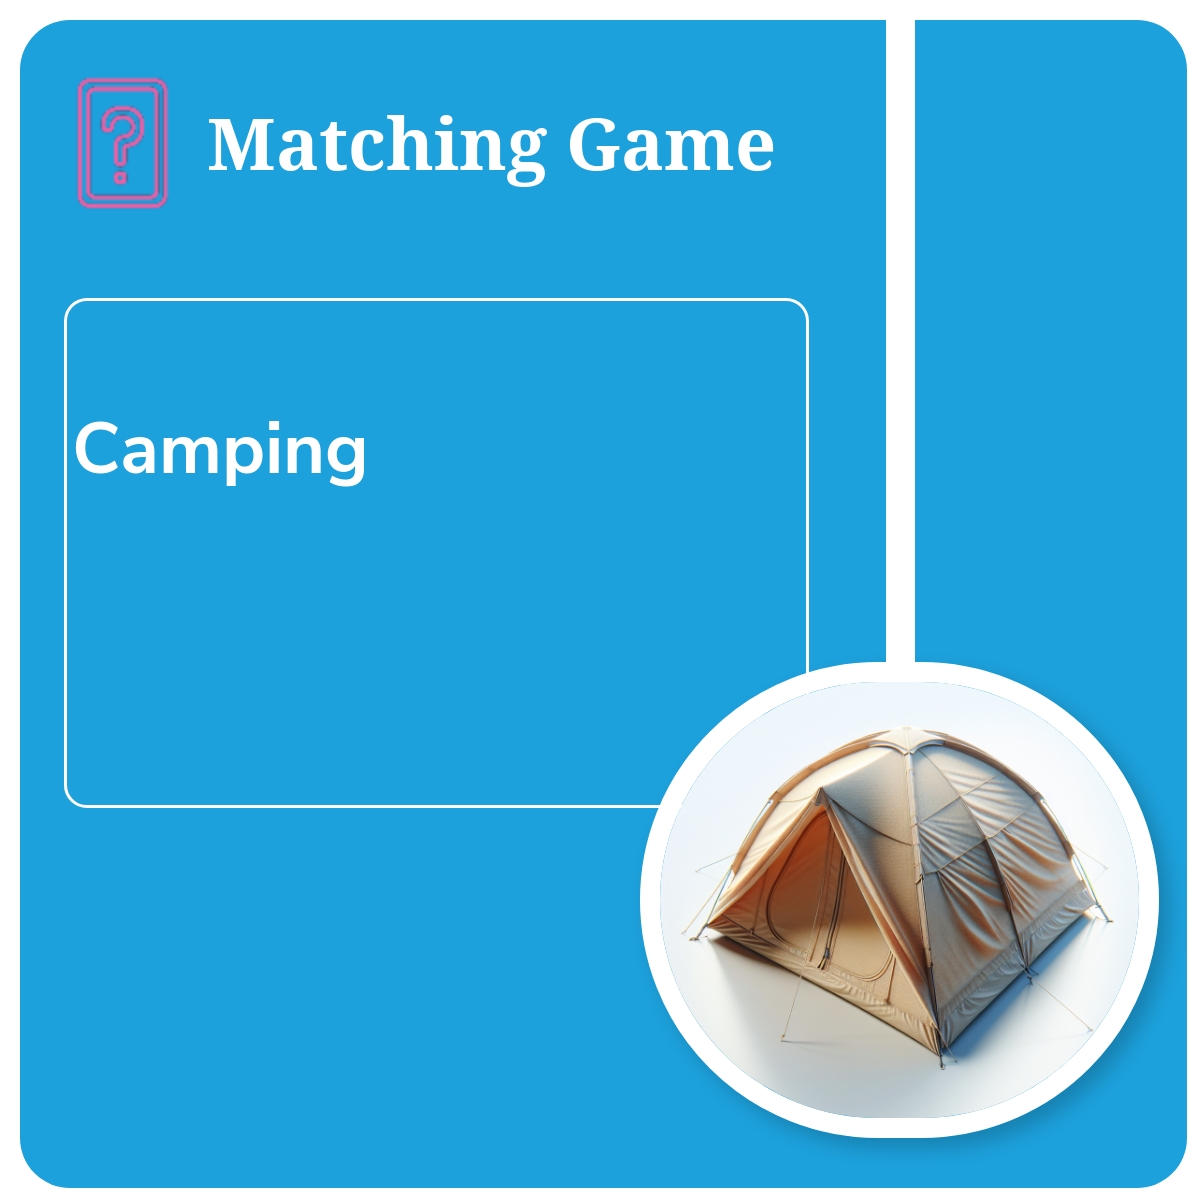 Matching Pictures to Definitions: Camping